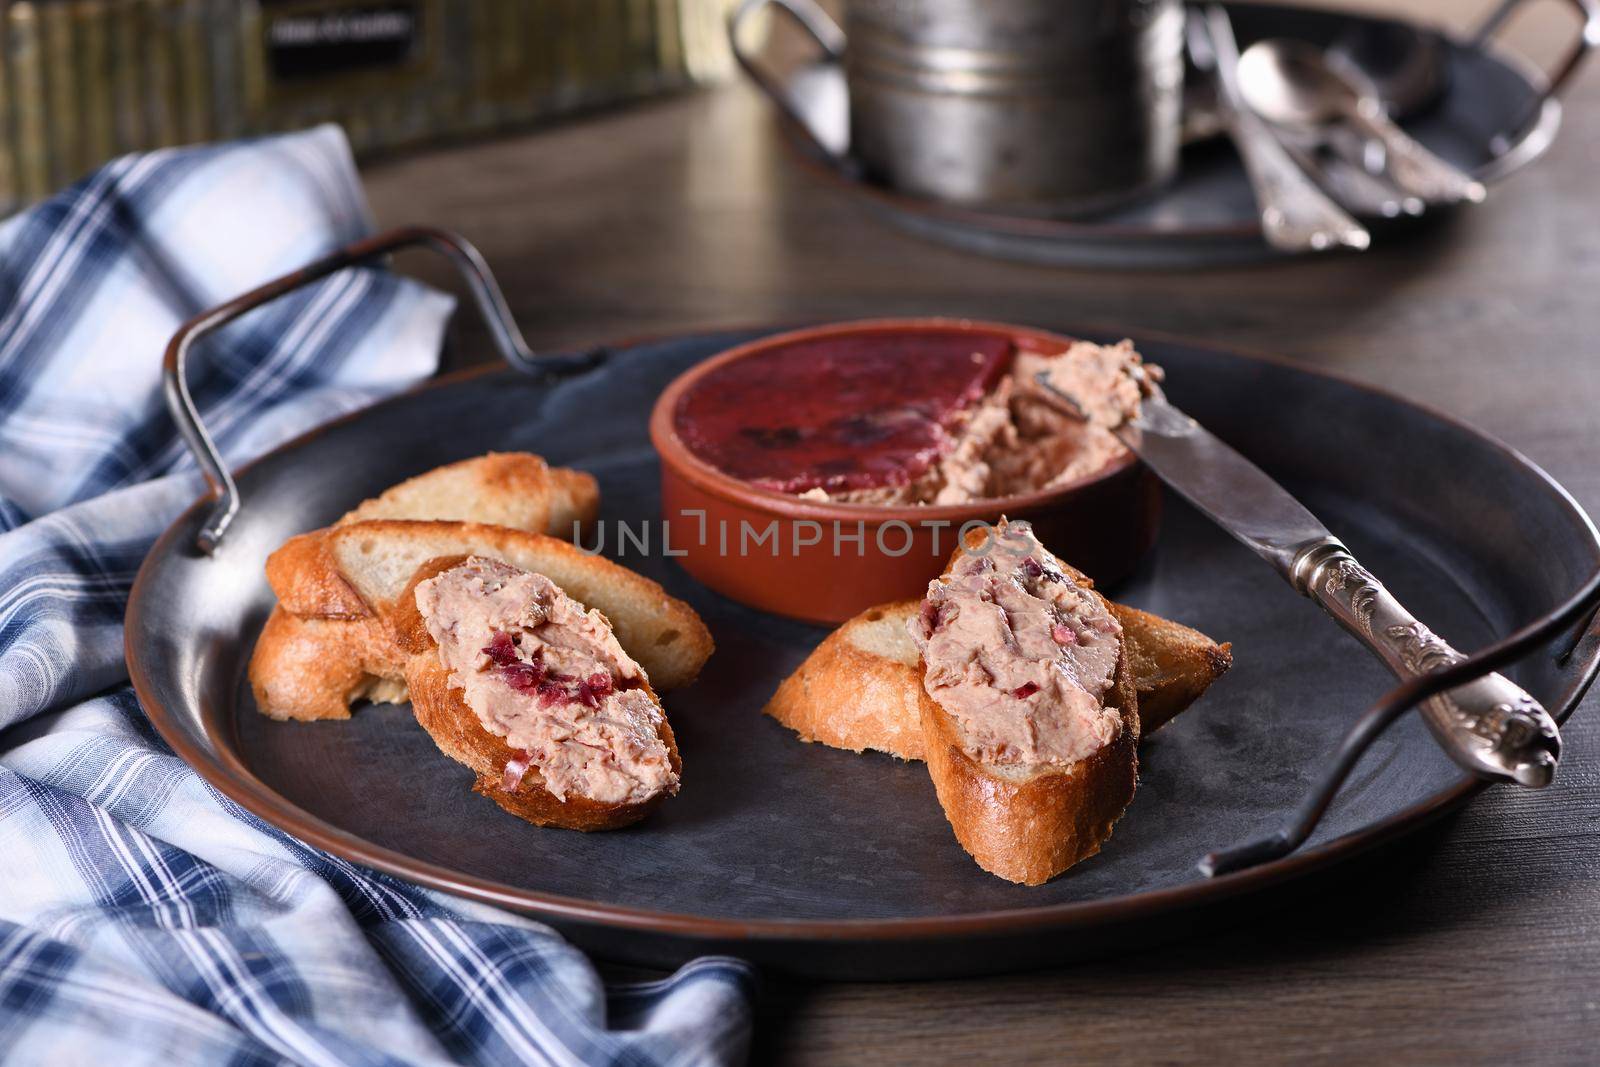 Chicken pate with cranberry jelly by Apolonia